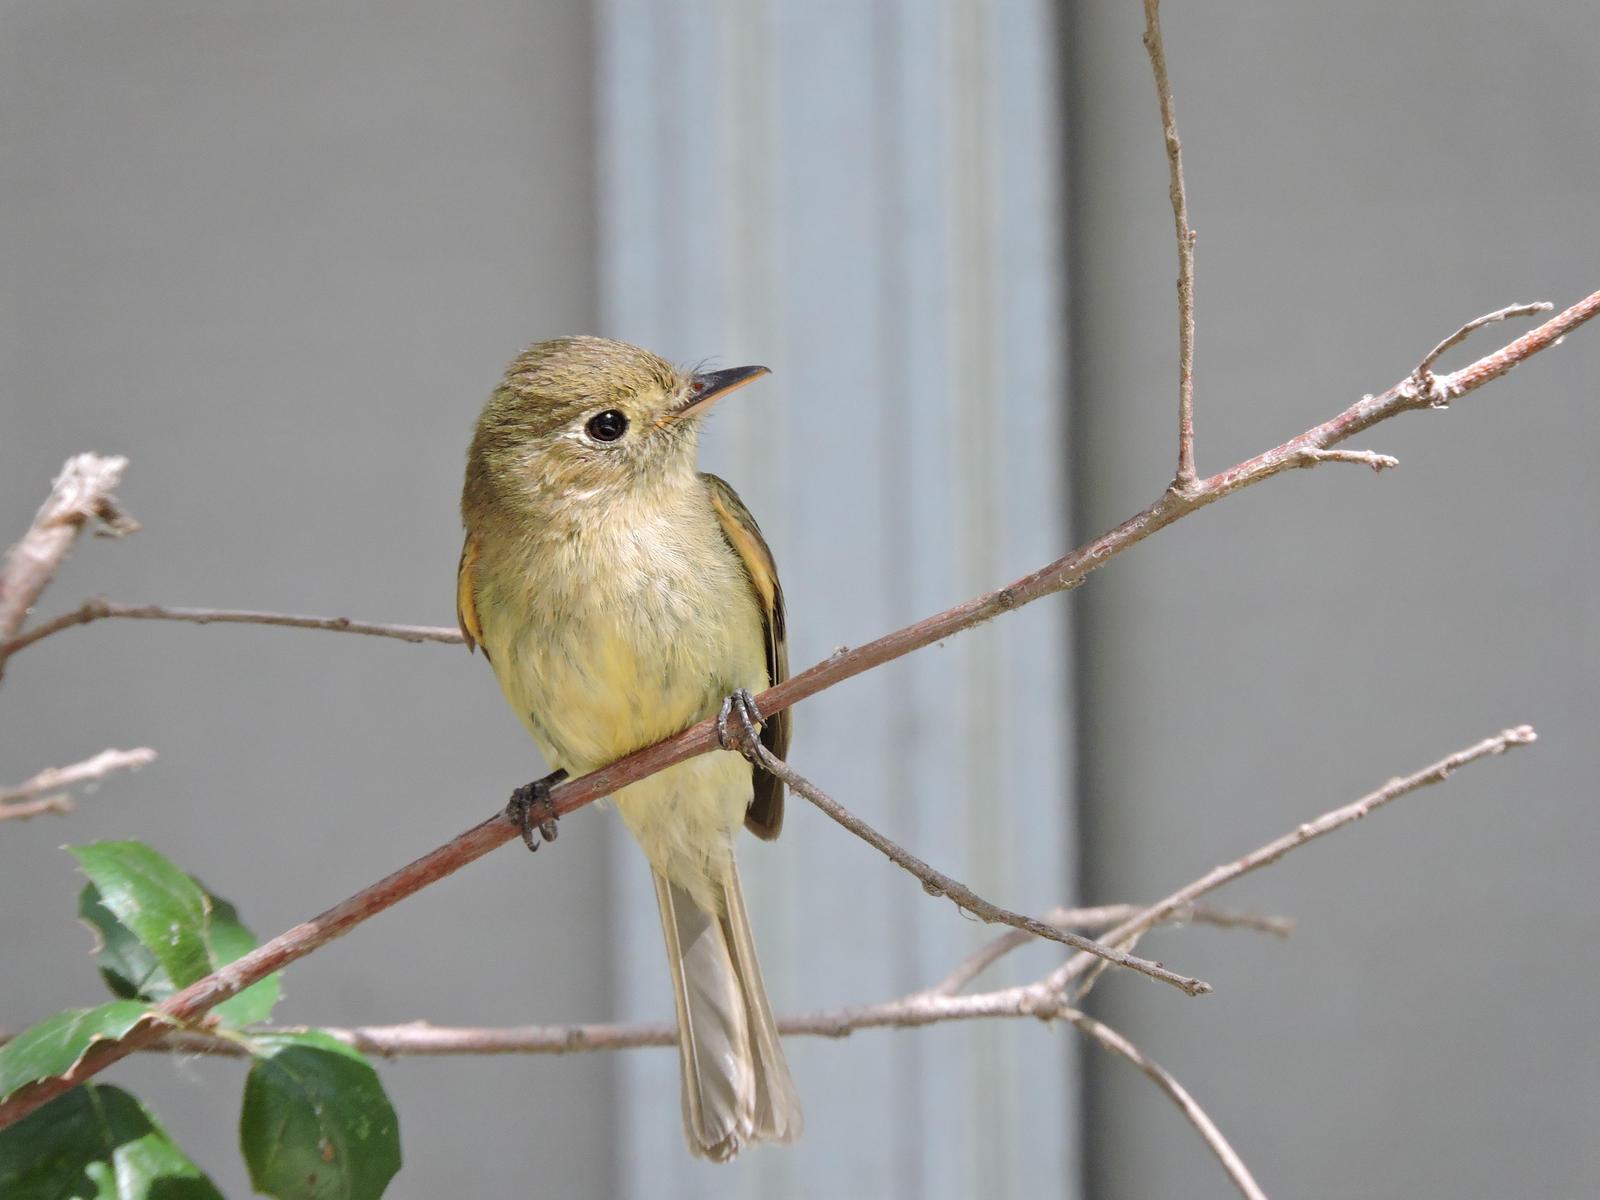 Pacific-slope Flycatcher Photo by Yvonne Burch-Hartley